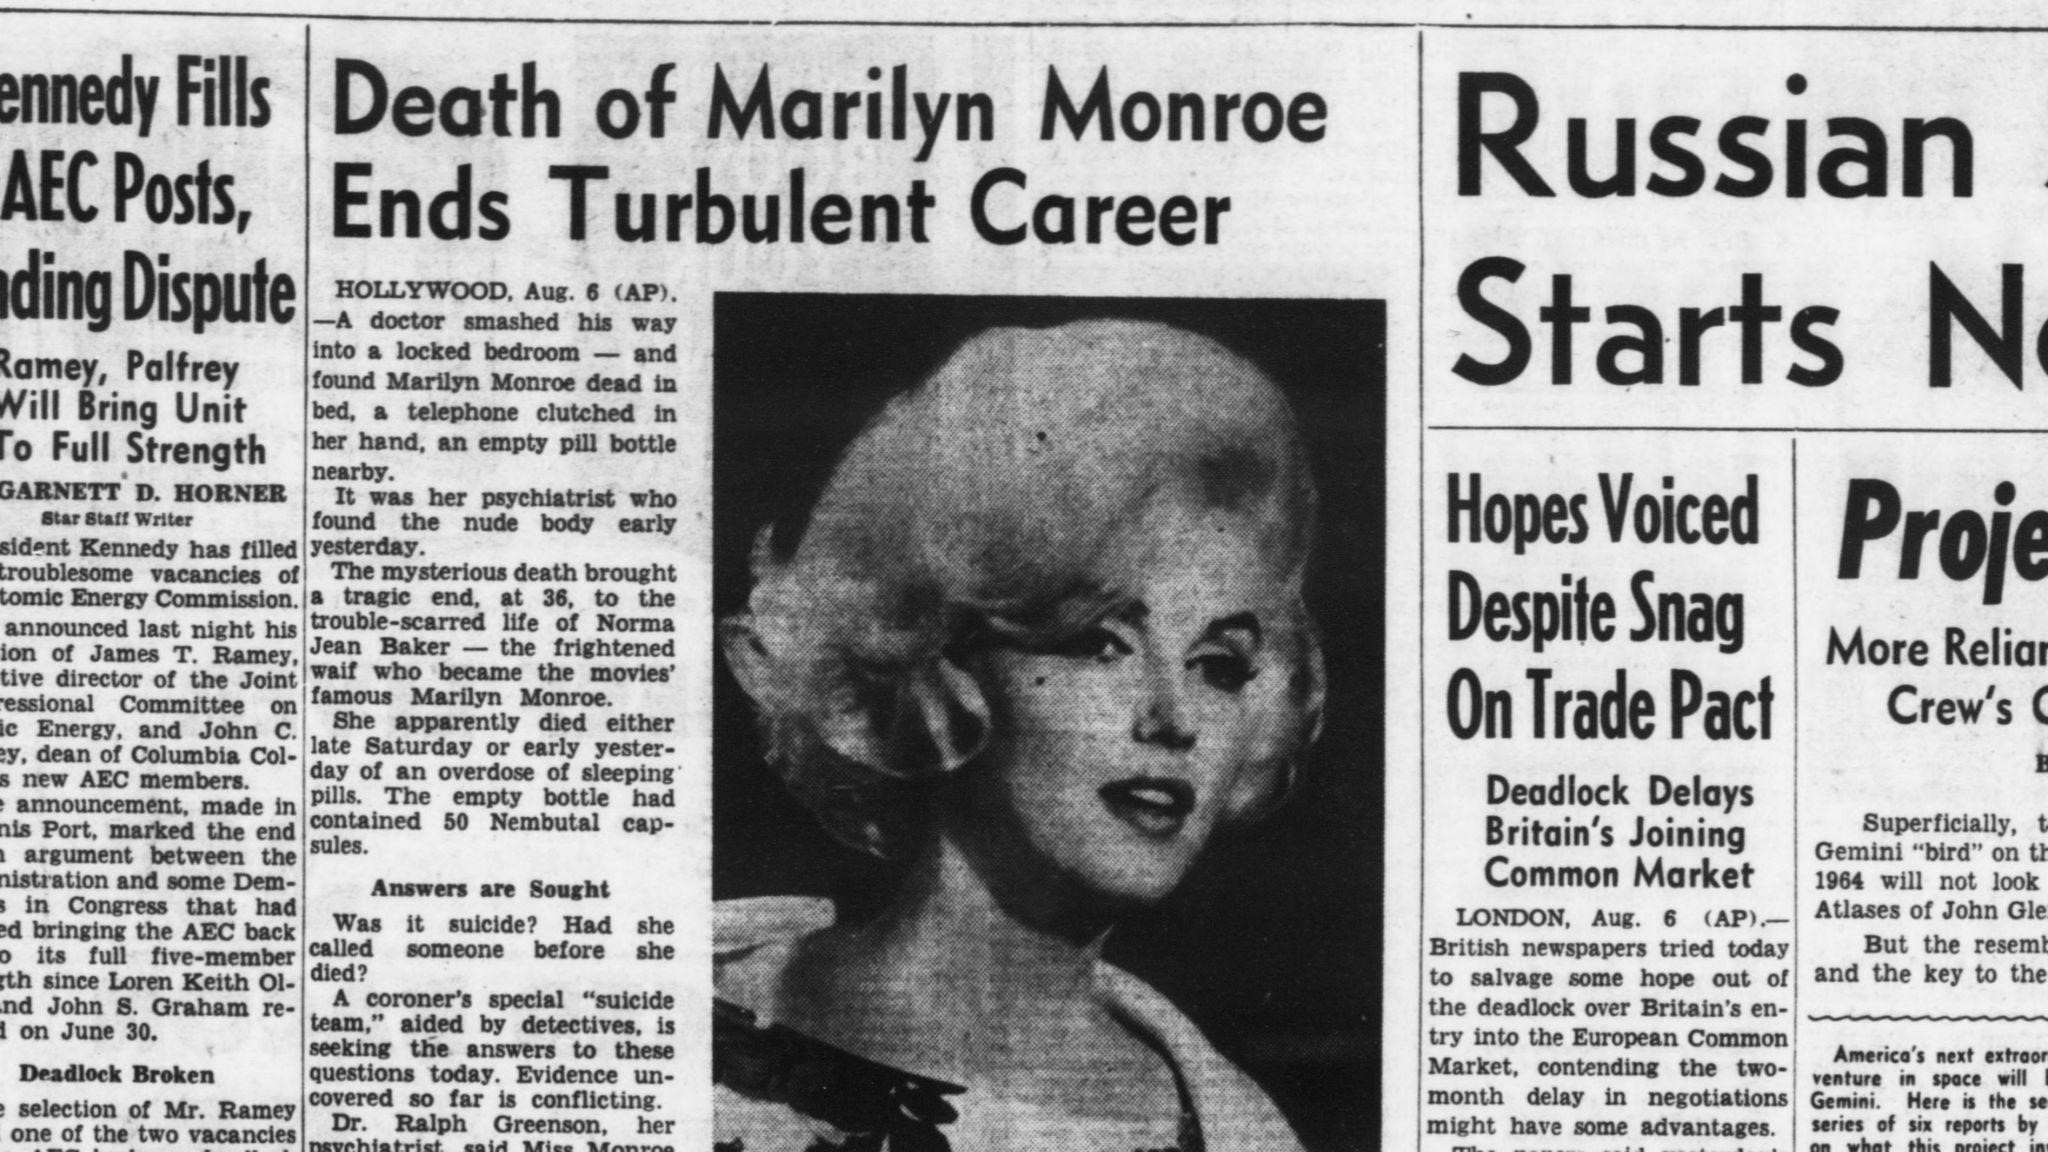 Marilyn Monroe, already a film and cultural icon, emerges as fashion star  on anniversary of her death